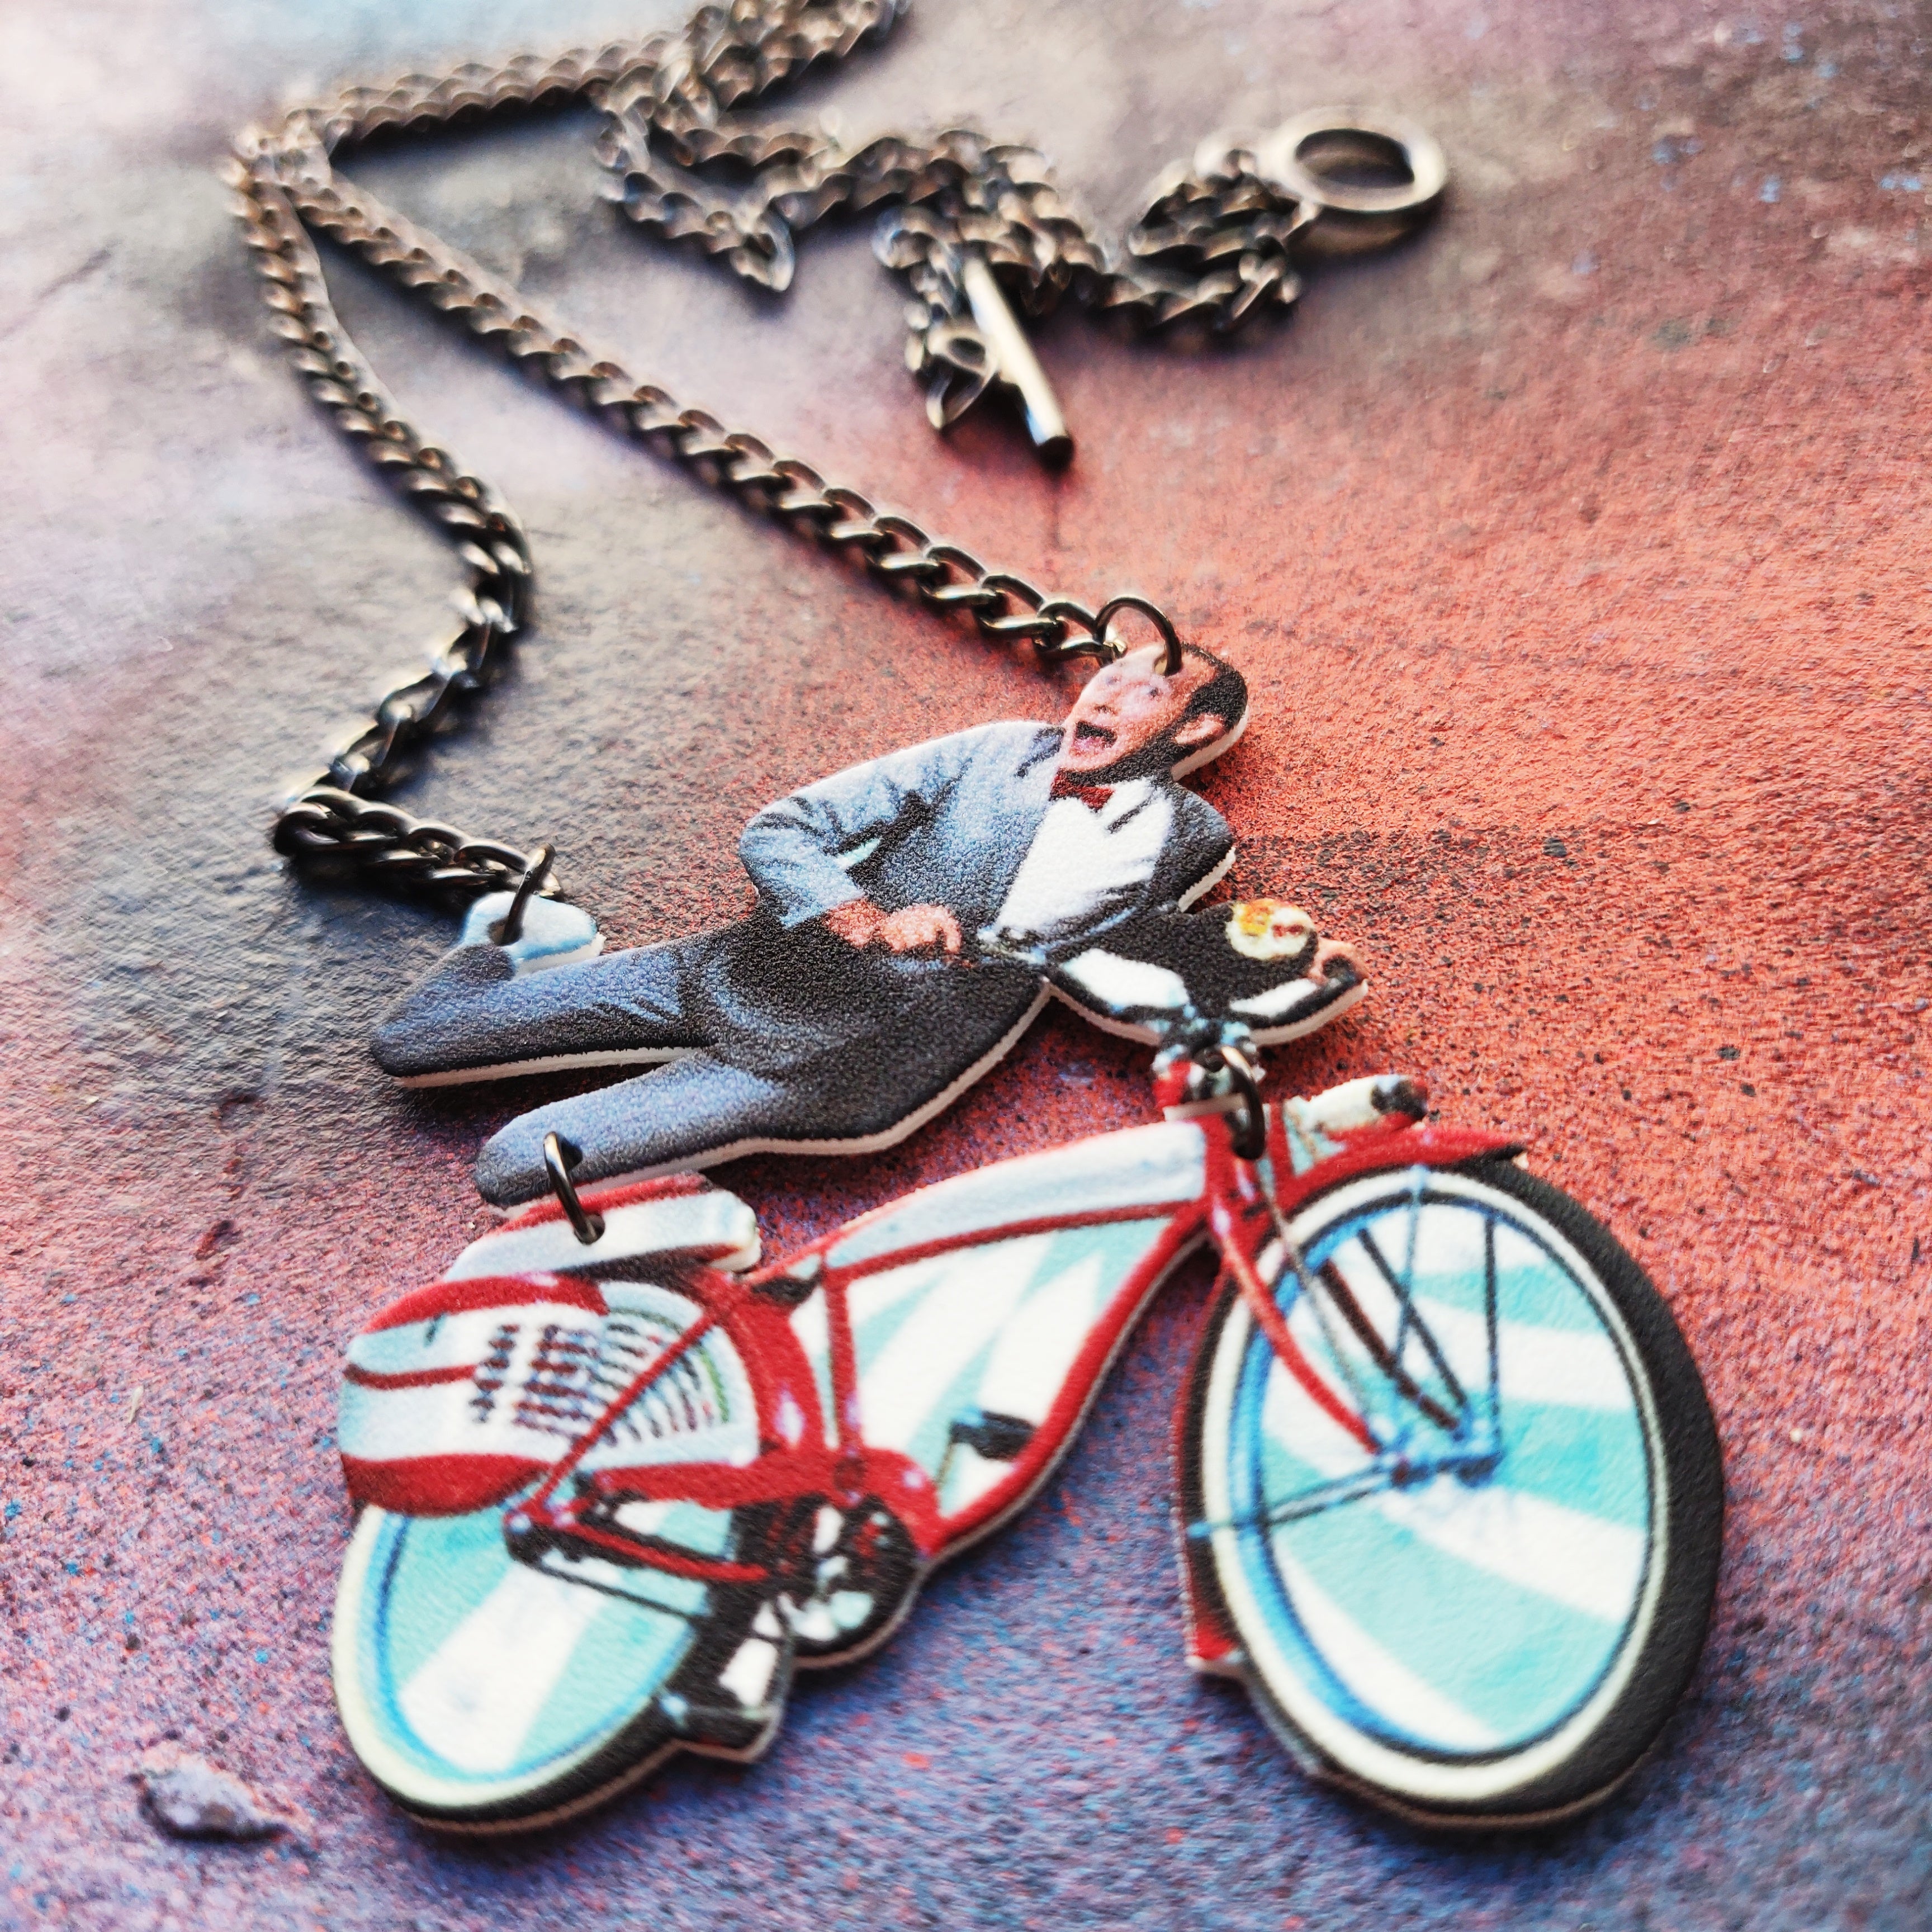 Pee Wee necklace